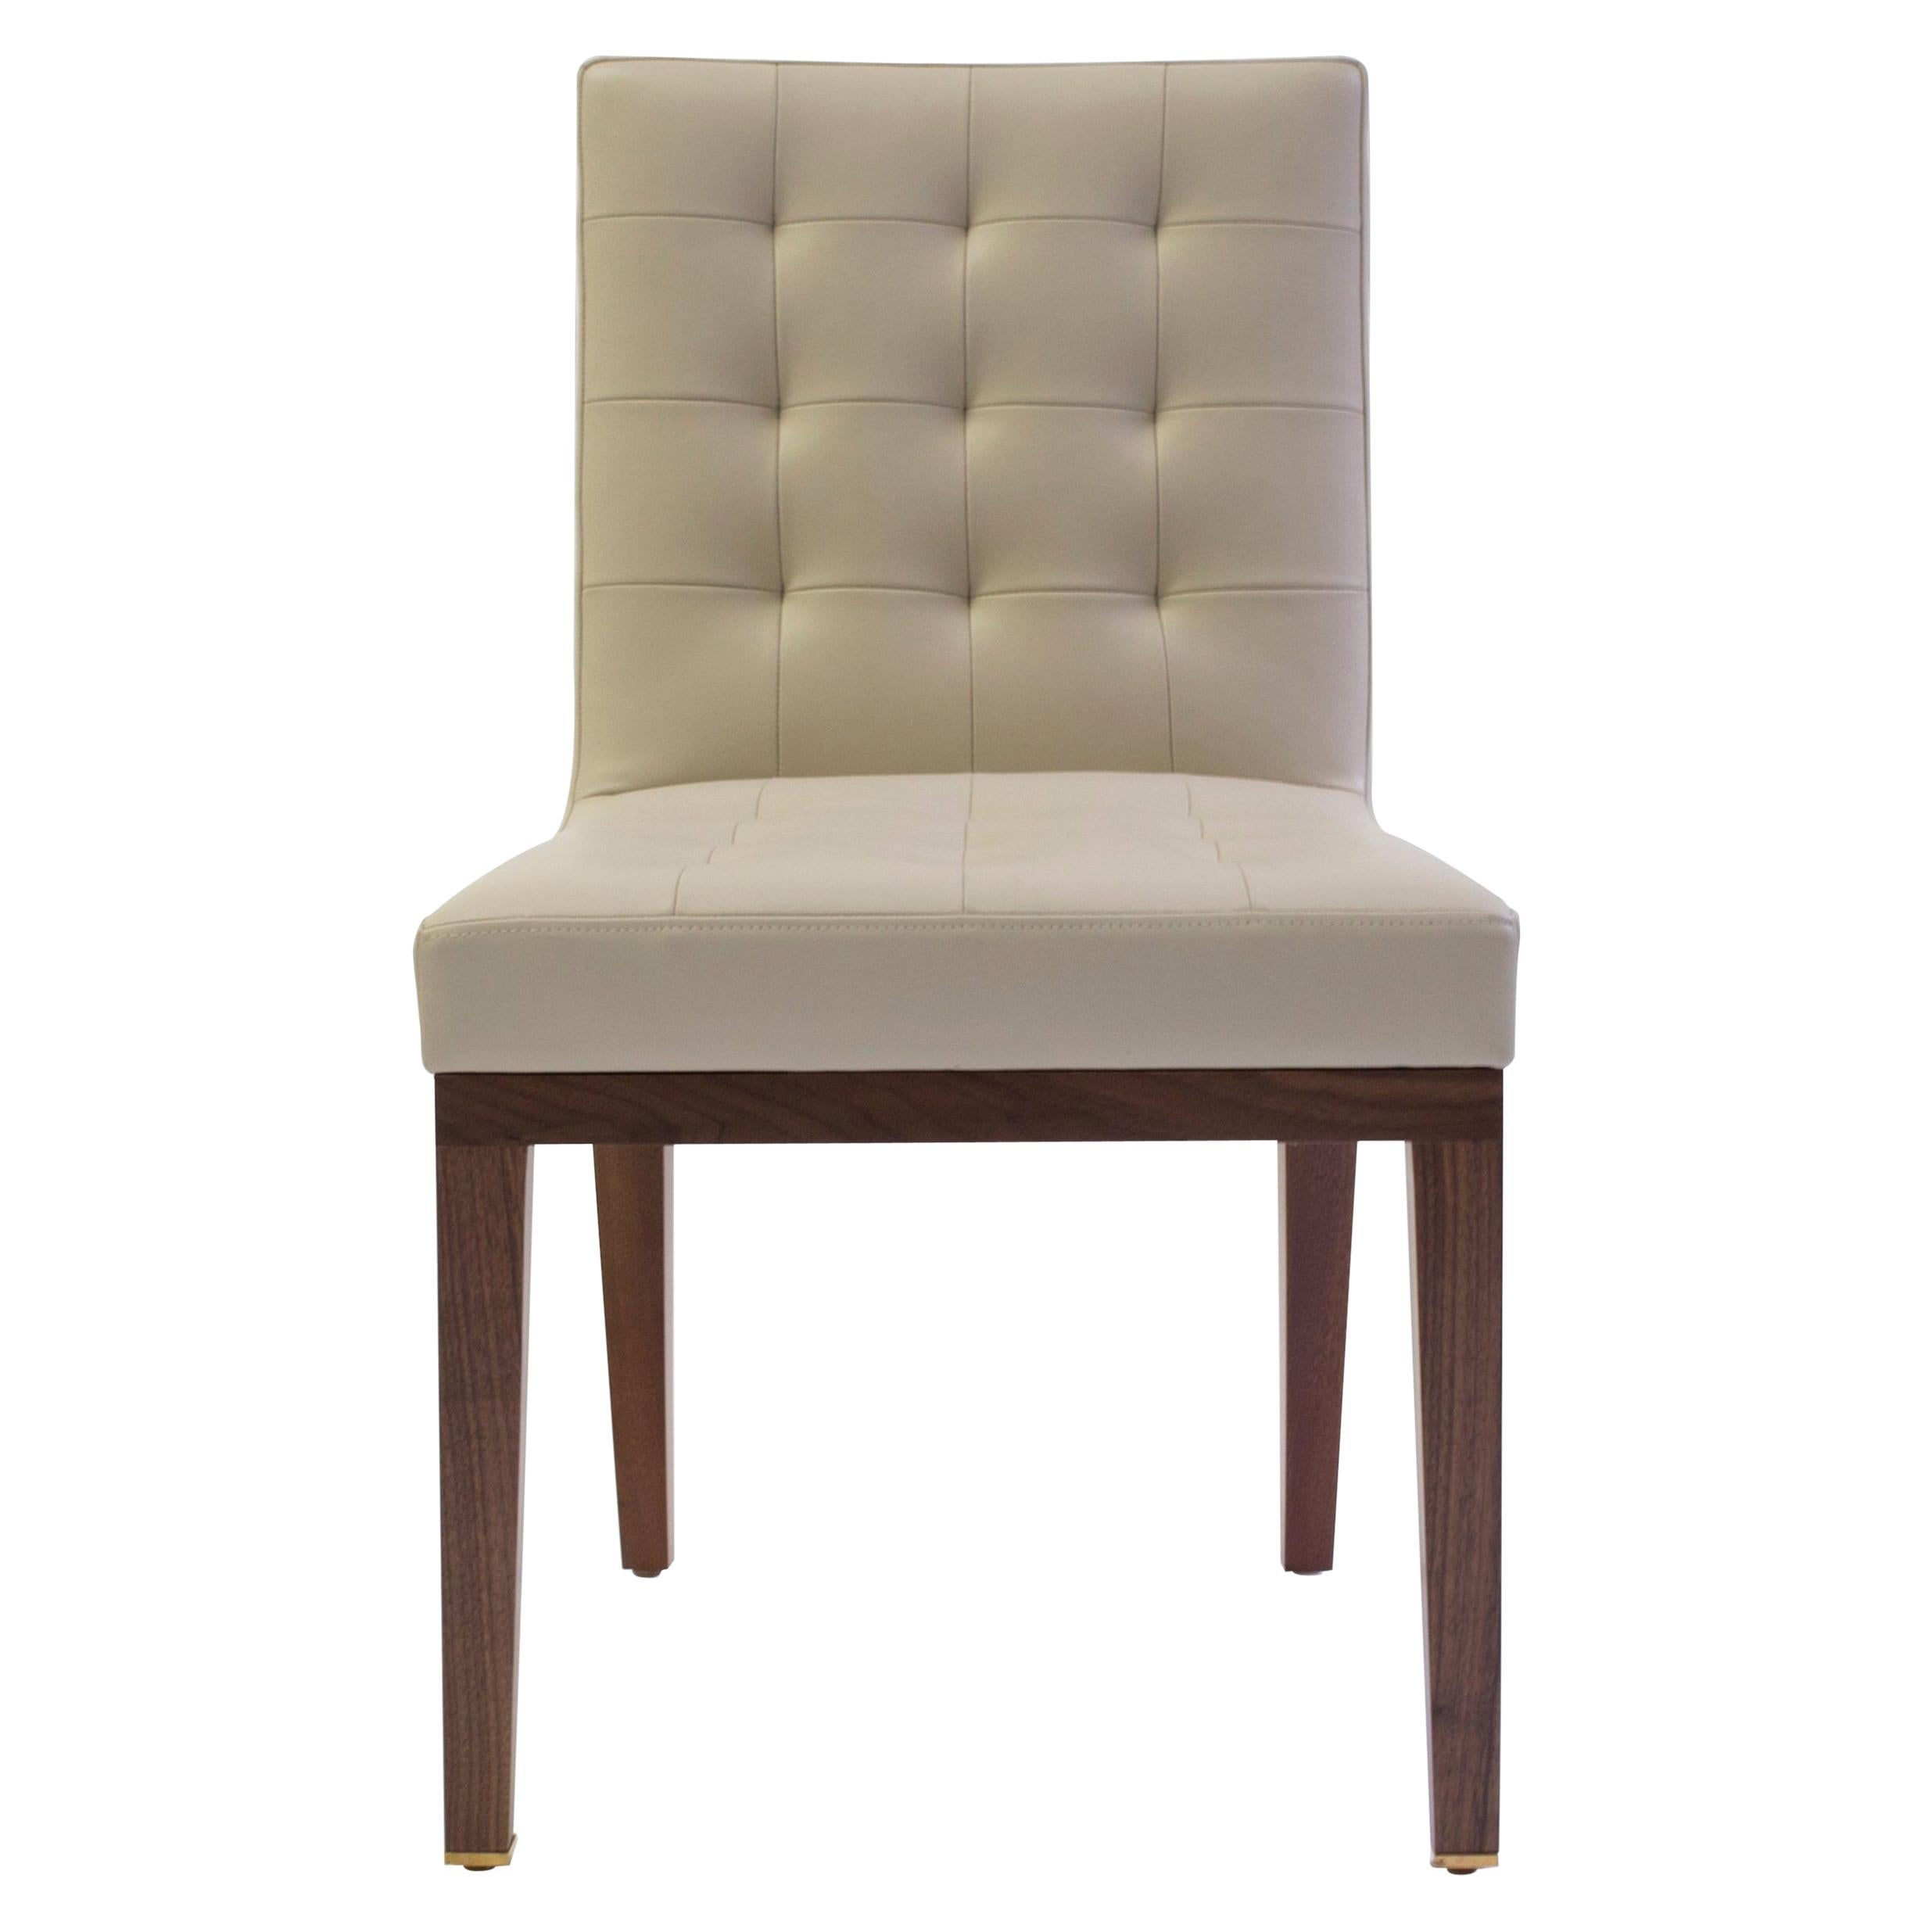 Tufted and Buttoned Side Chair Shown in Tan Leather with Medium Oakwood Legs